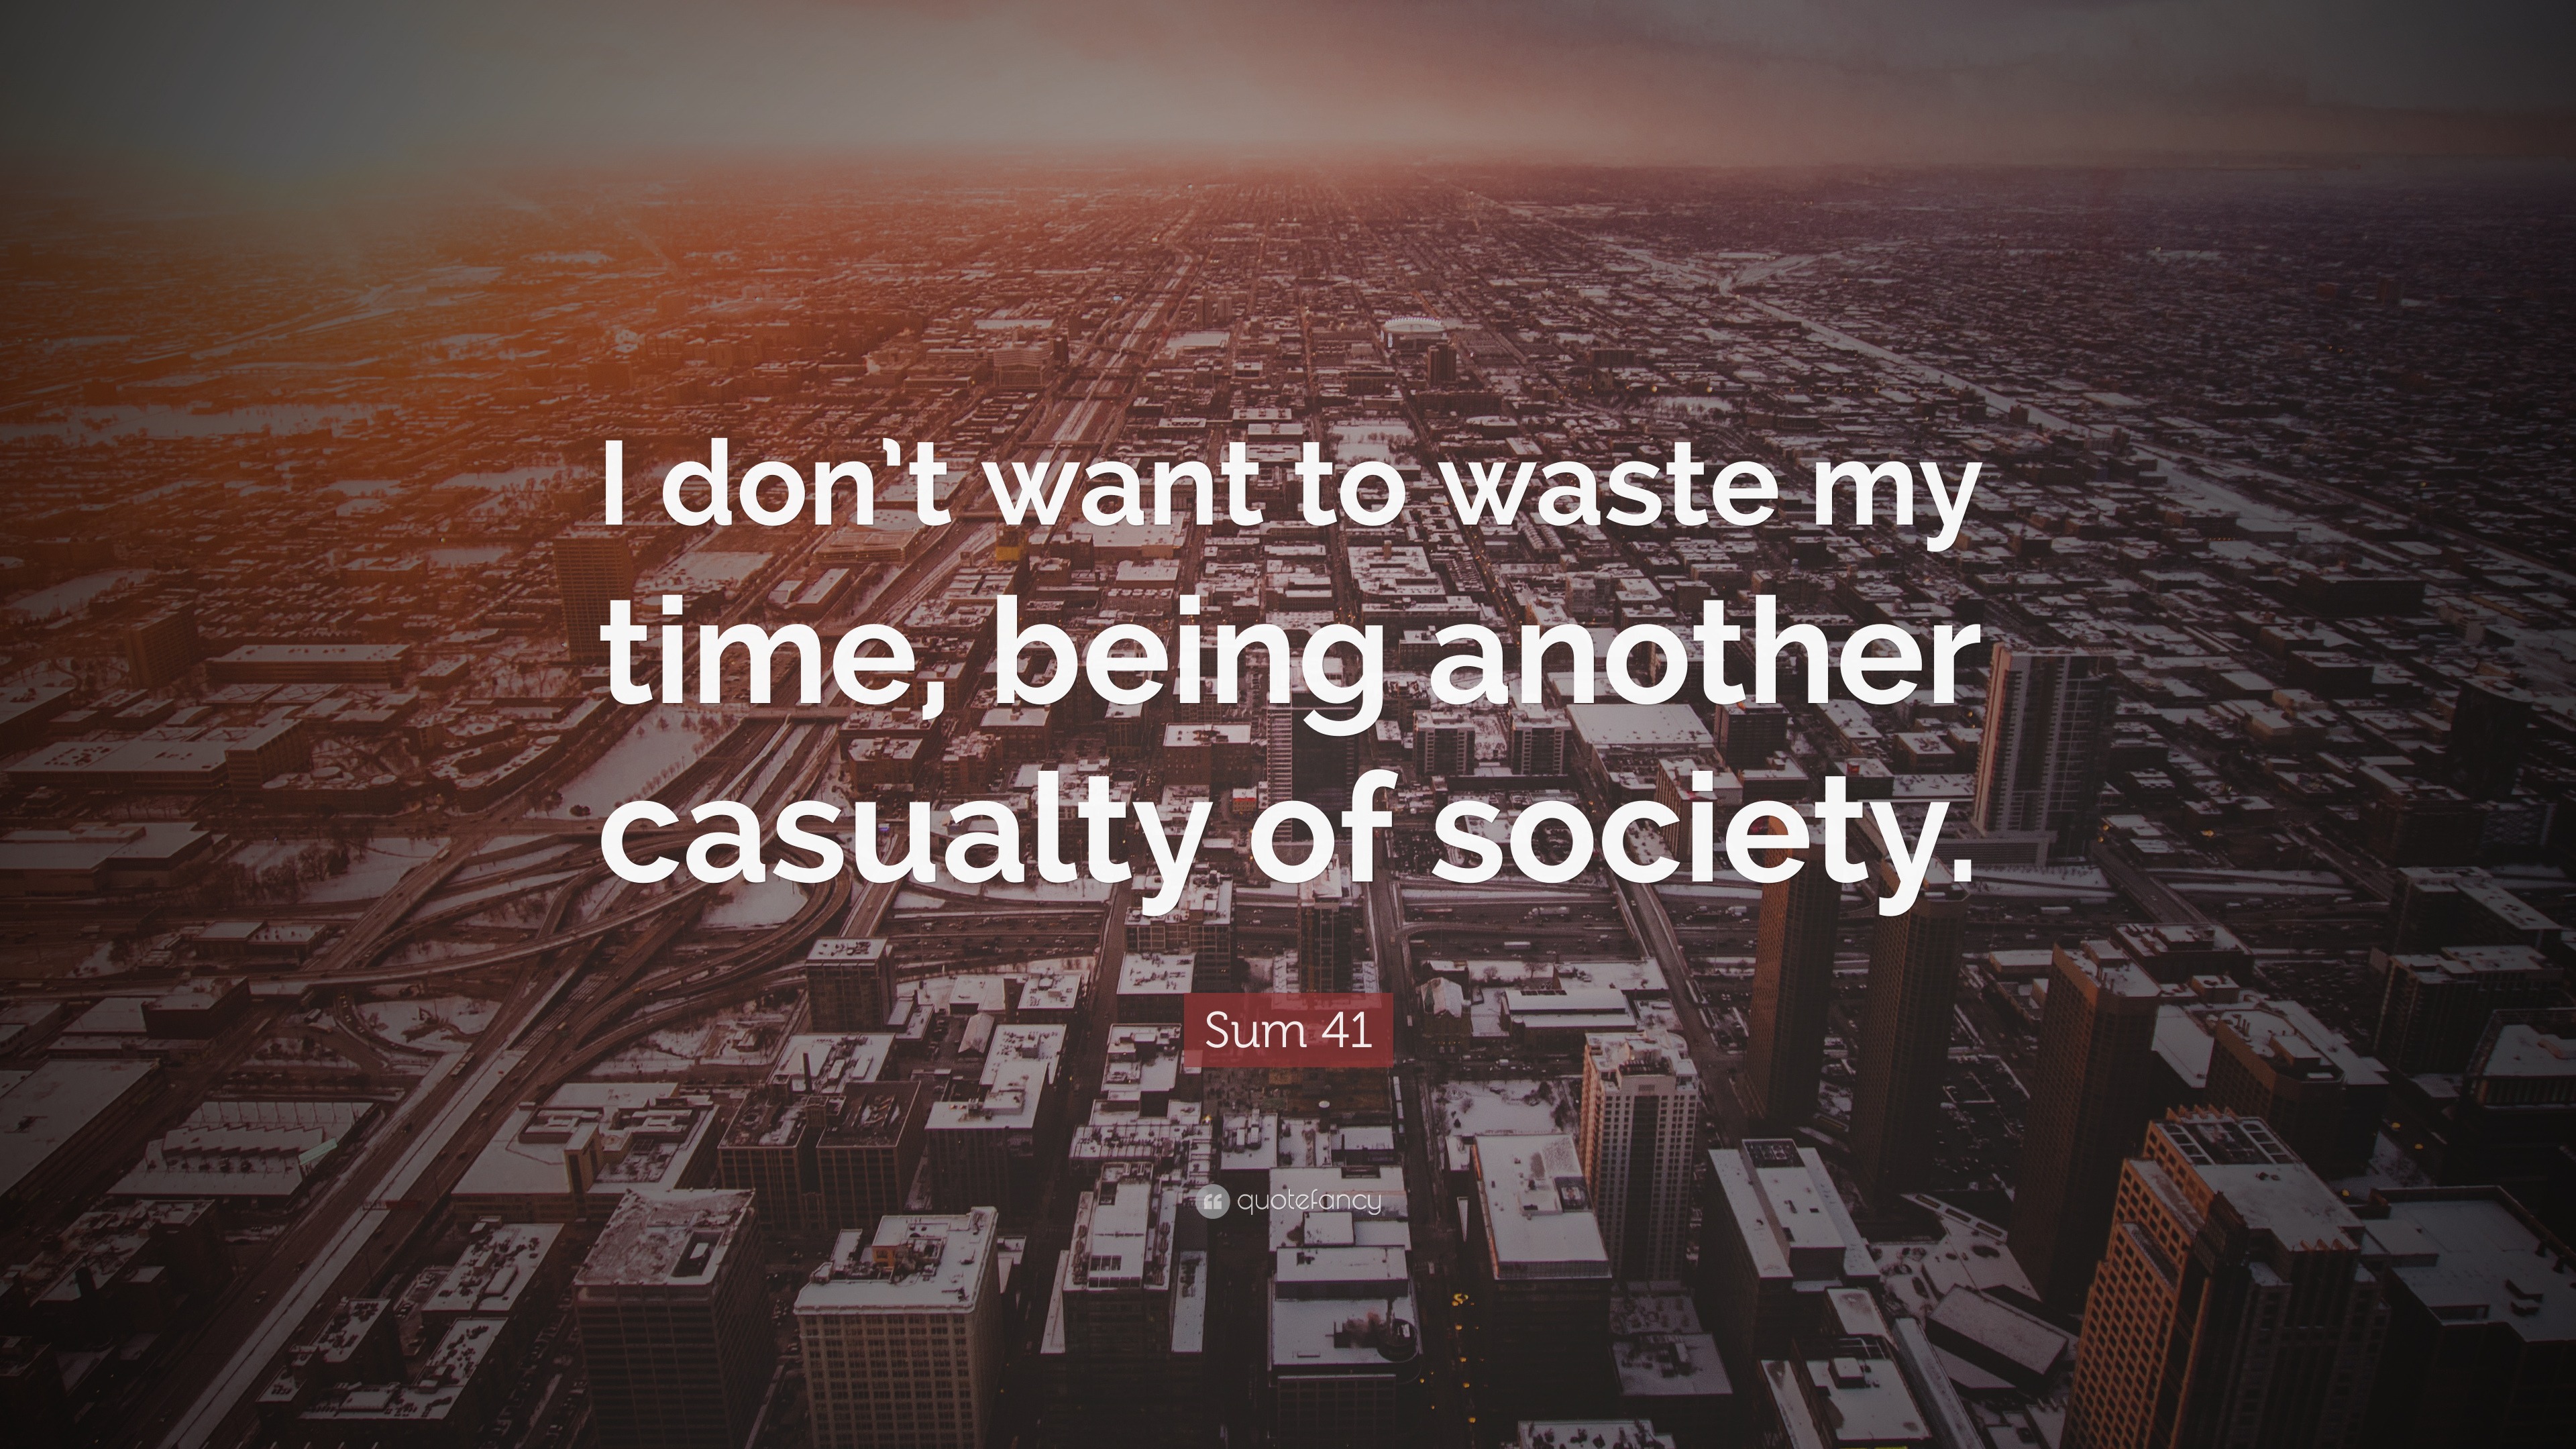 Sum 41 Quote: “I don't want to waste my being another casualty of society.”